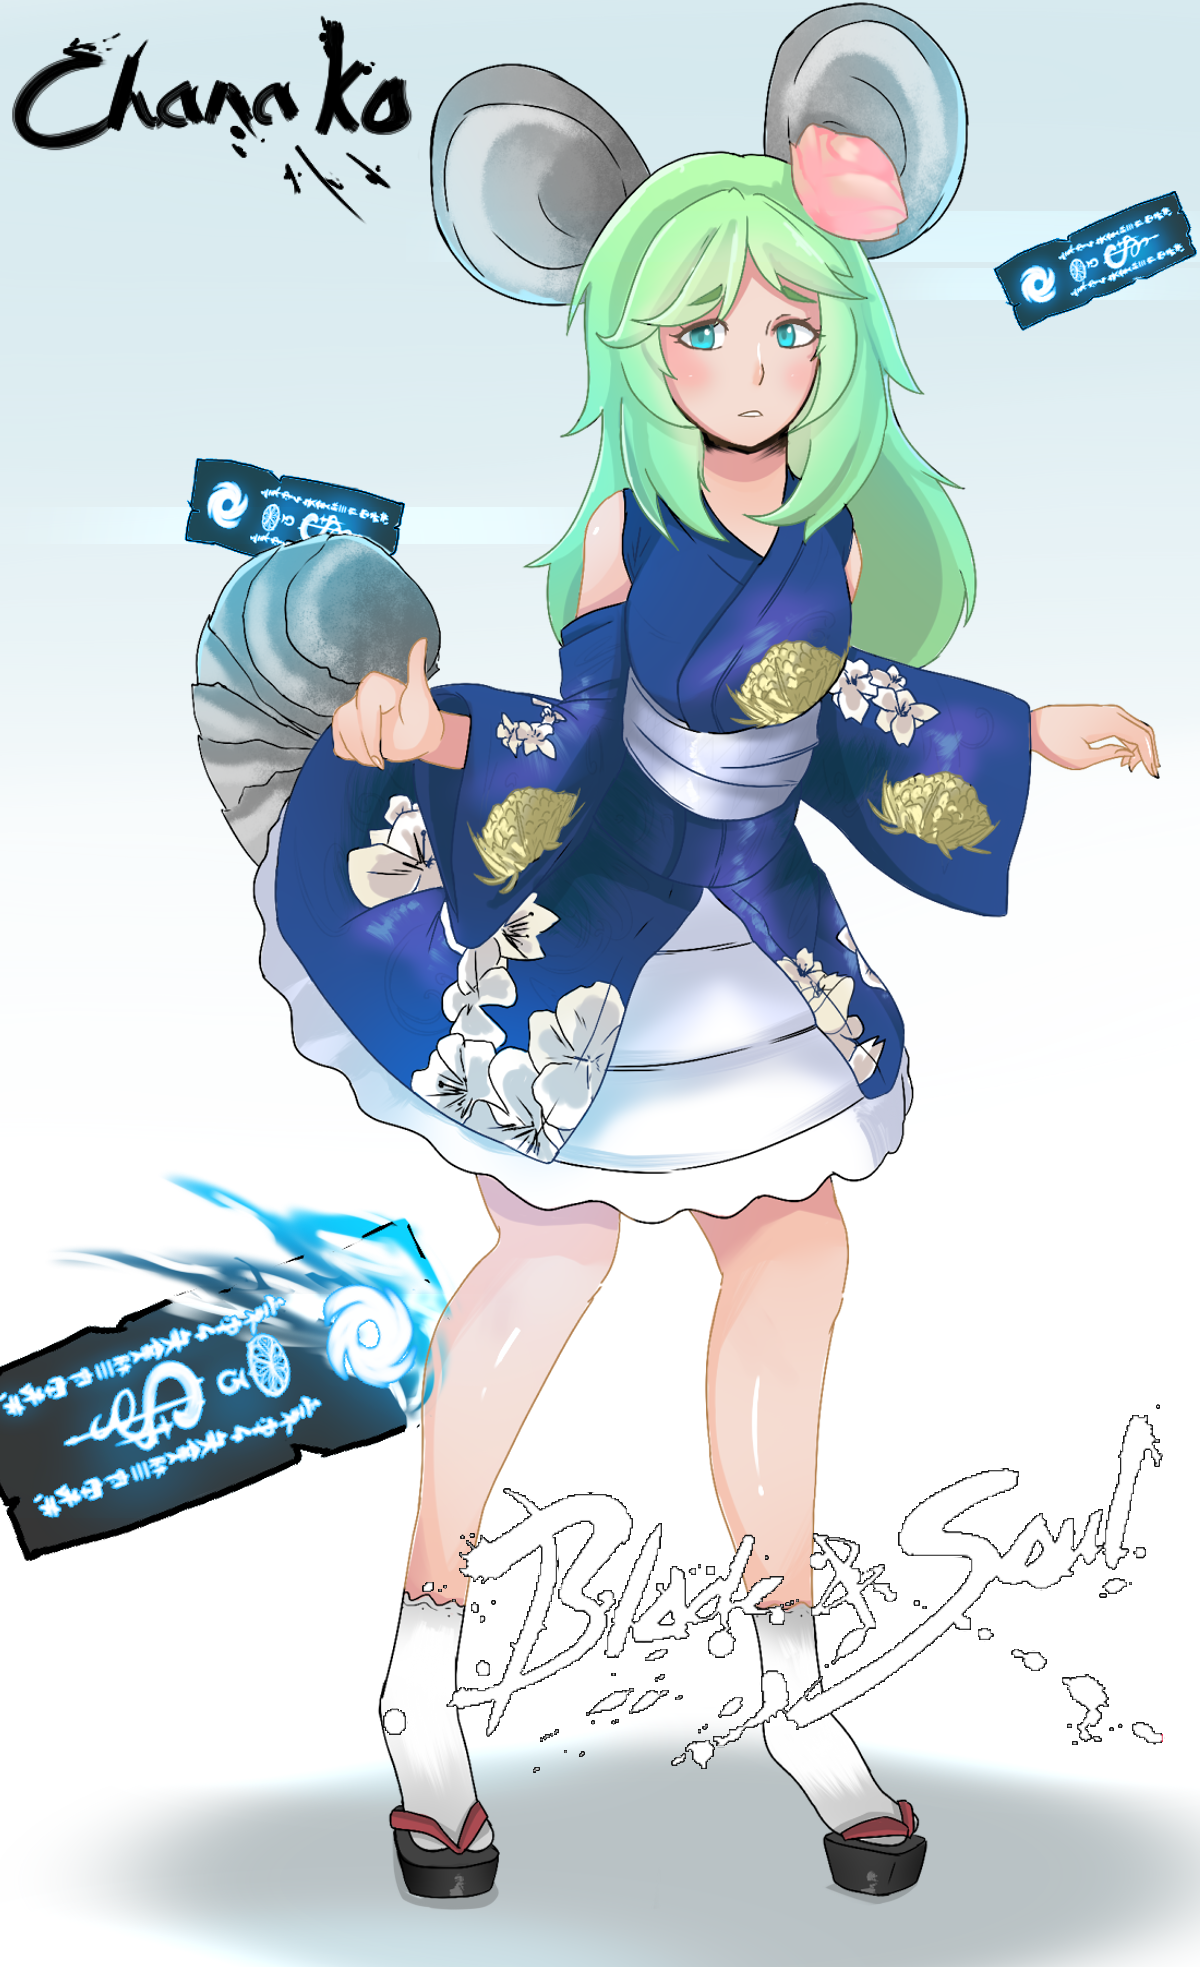 bns_chanako_2_by_xerophase-db7heev.png